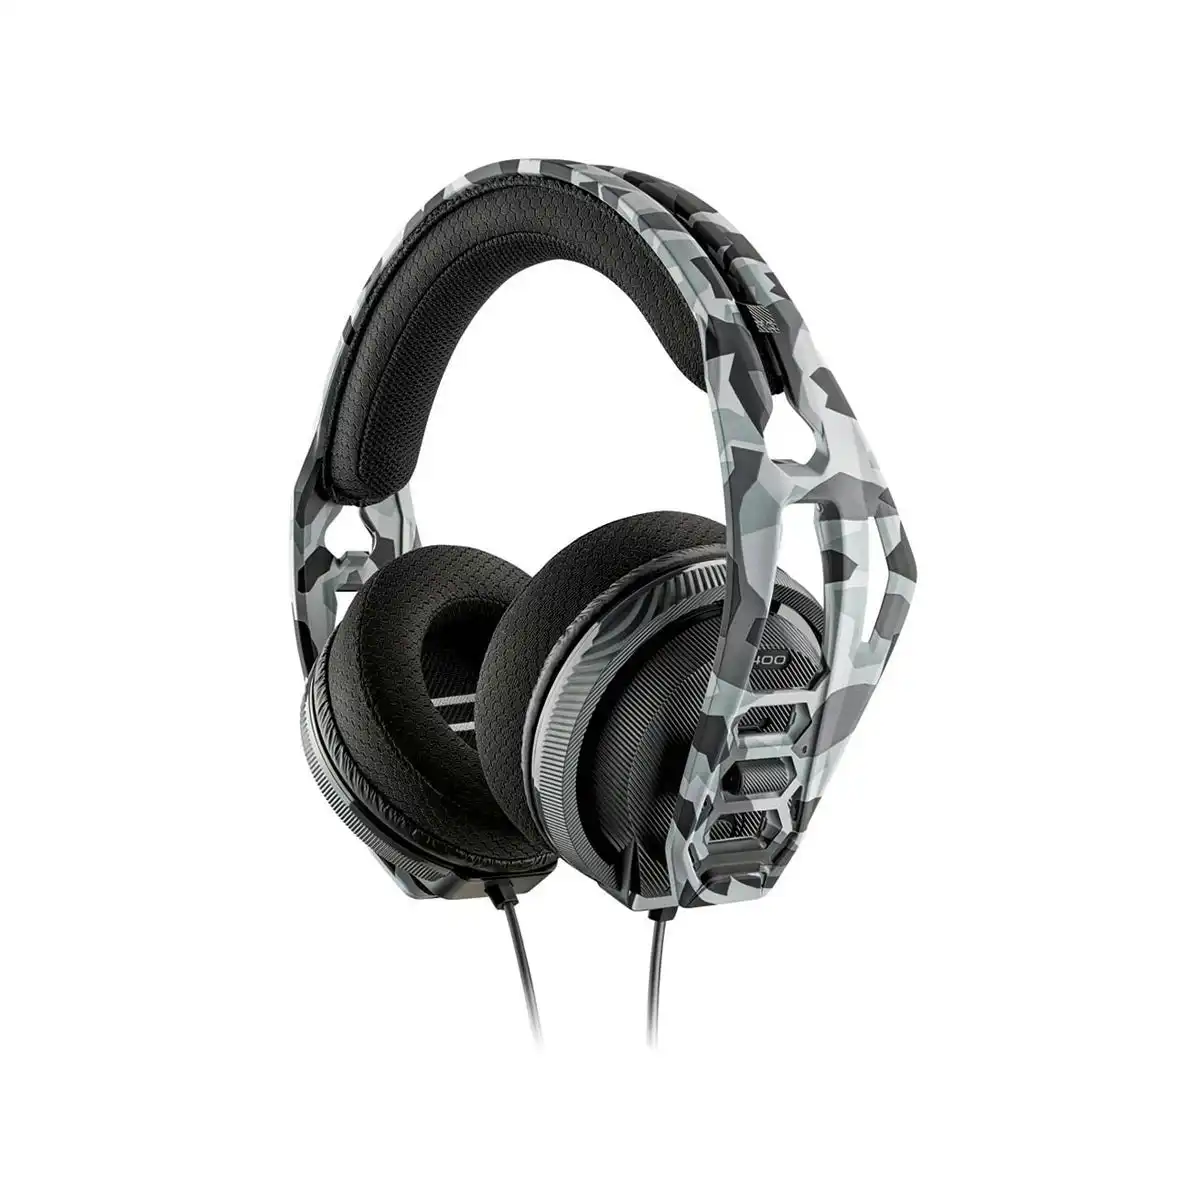 RIG 400HS V2 Stereo Gaming Headset - Arctic Camo